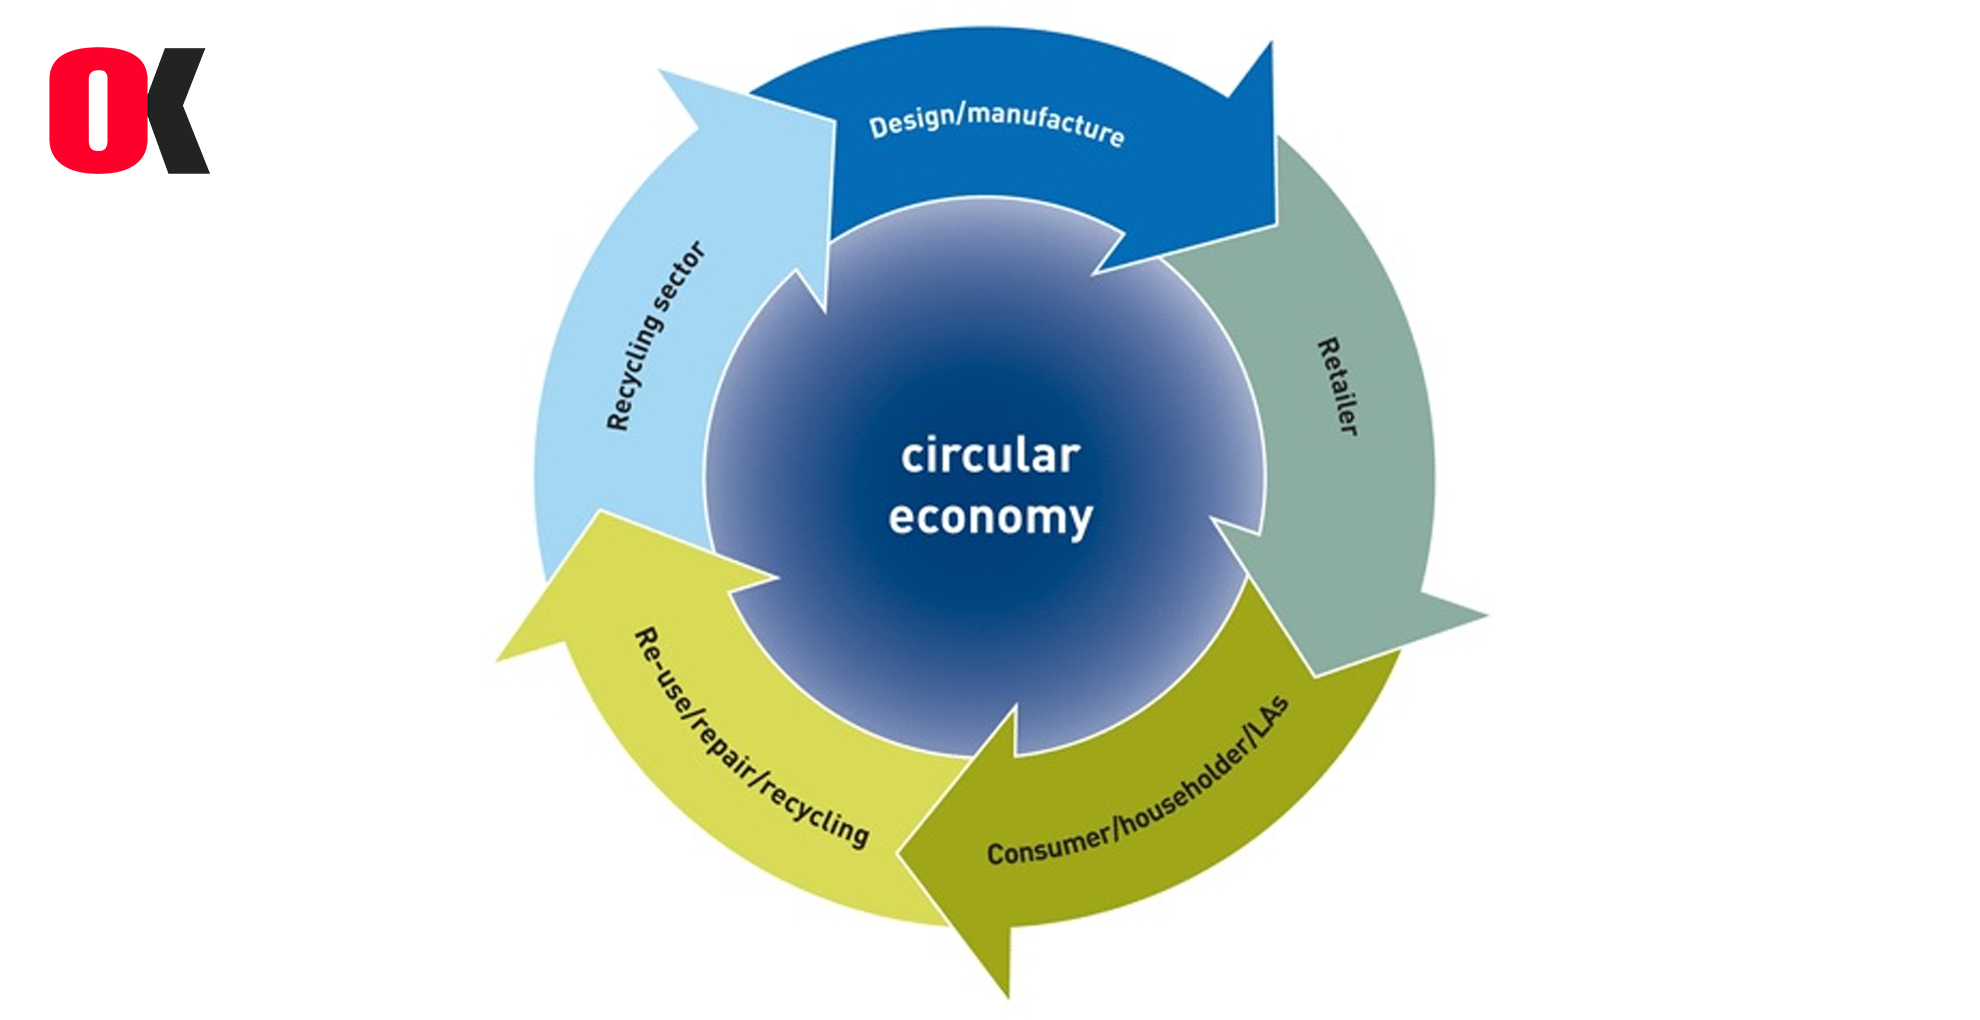 Circular economy has been promoted by 5 years of supervision